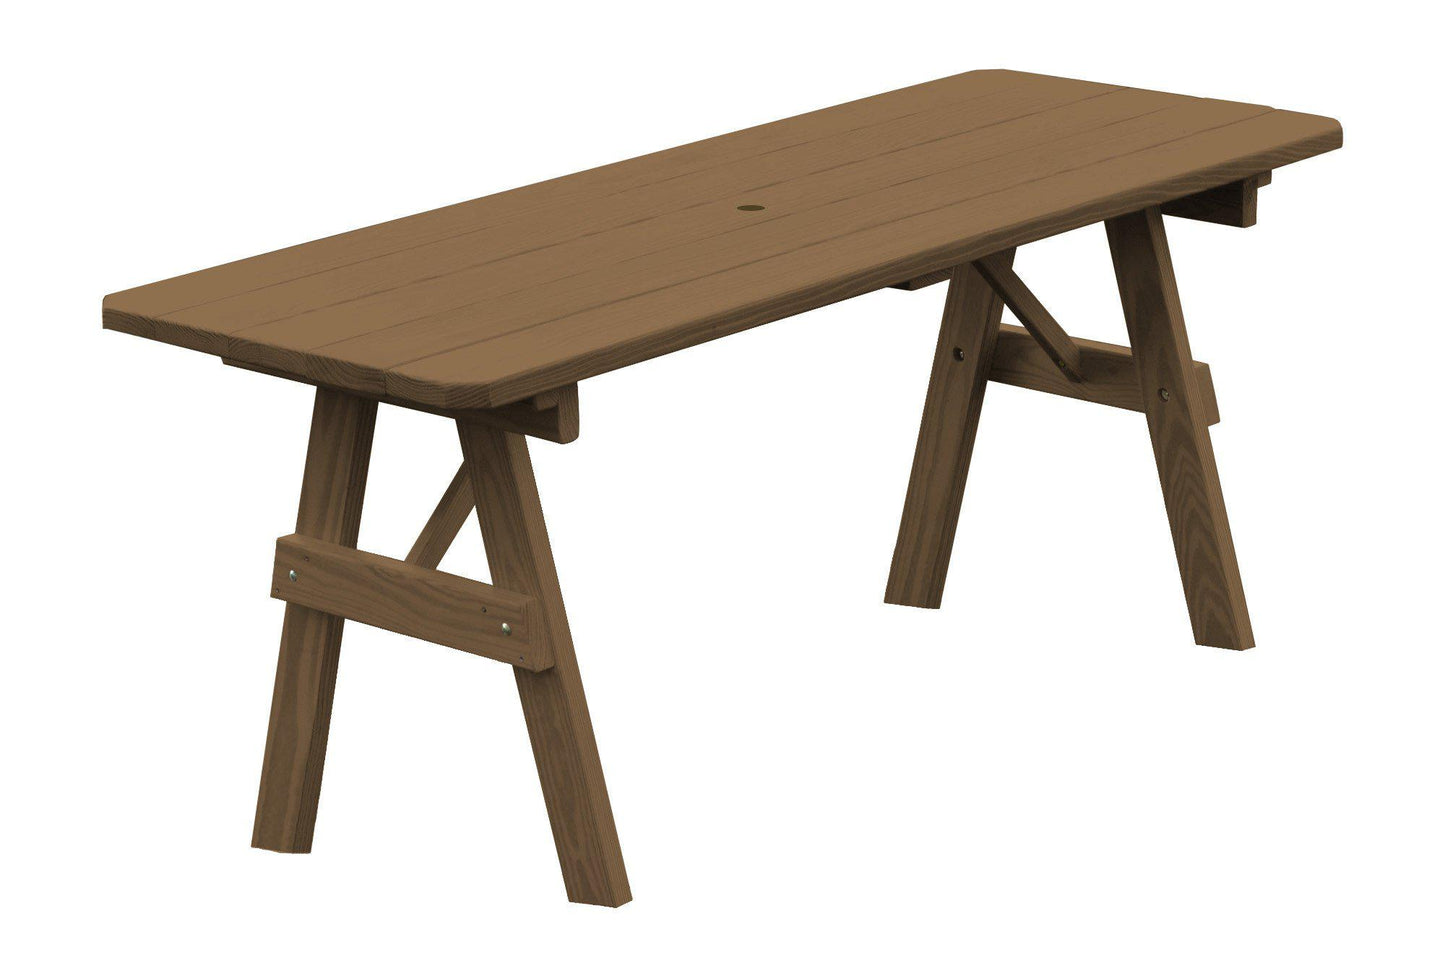 A&L Furniture Co. Pressure Treated Pine 6' Traditional Table Only - LEAD TIME TO SHIP 10 BUSINESS DAYS